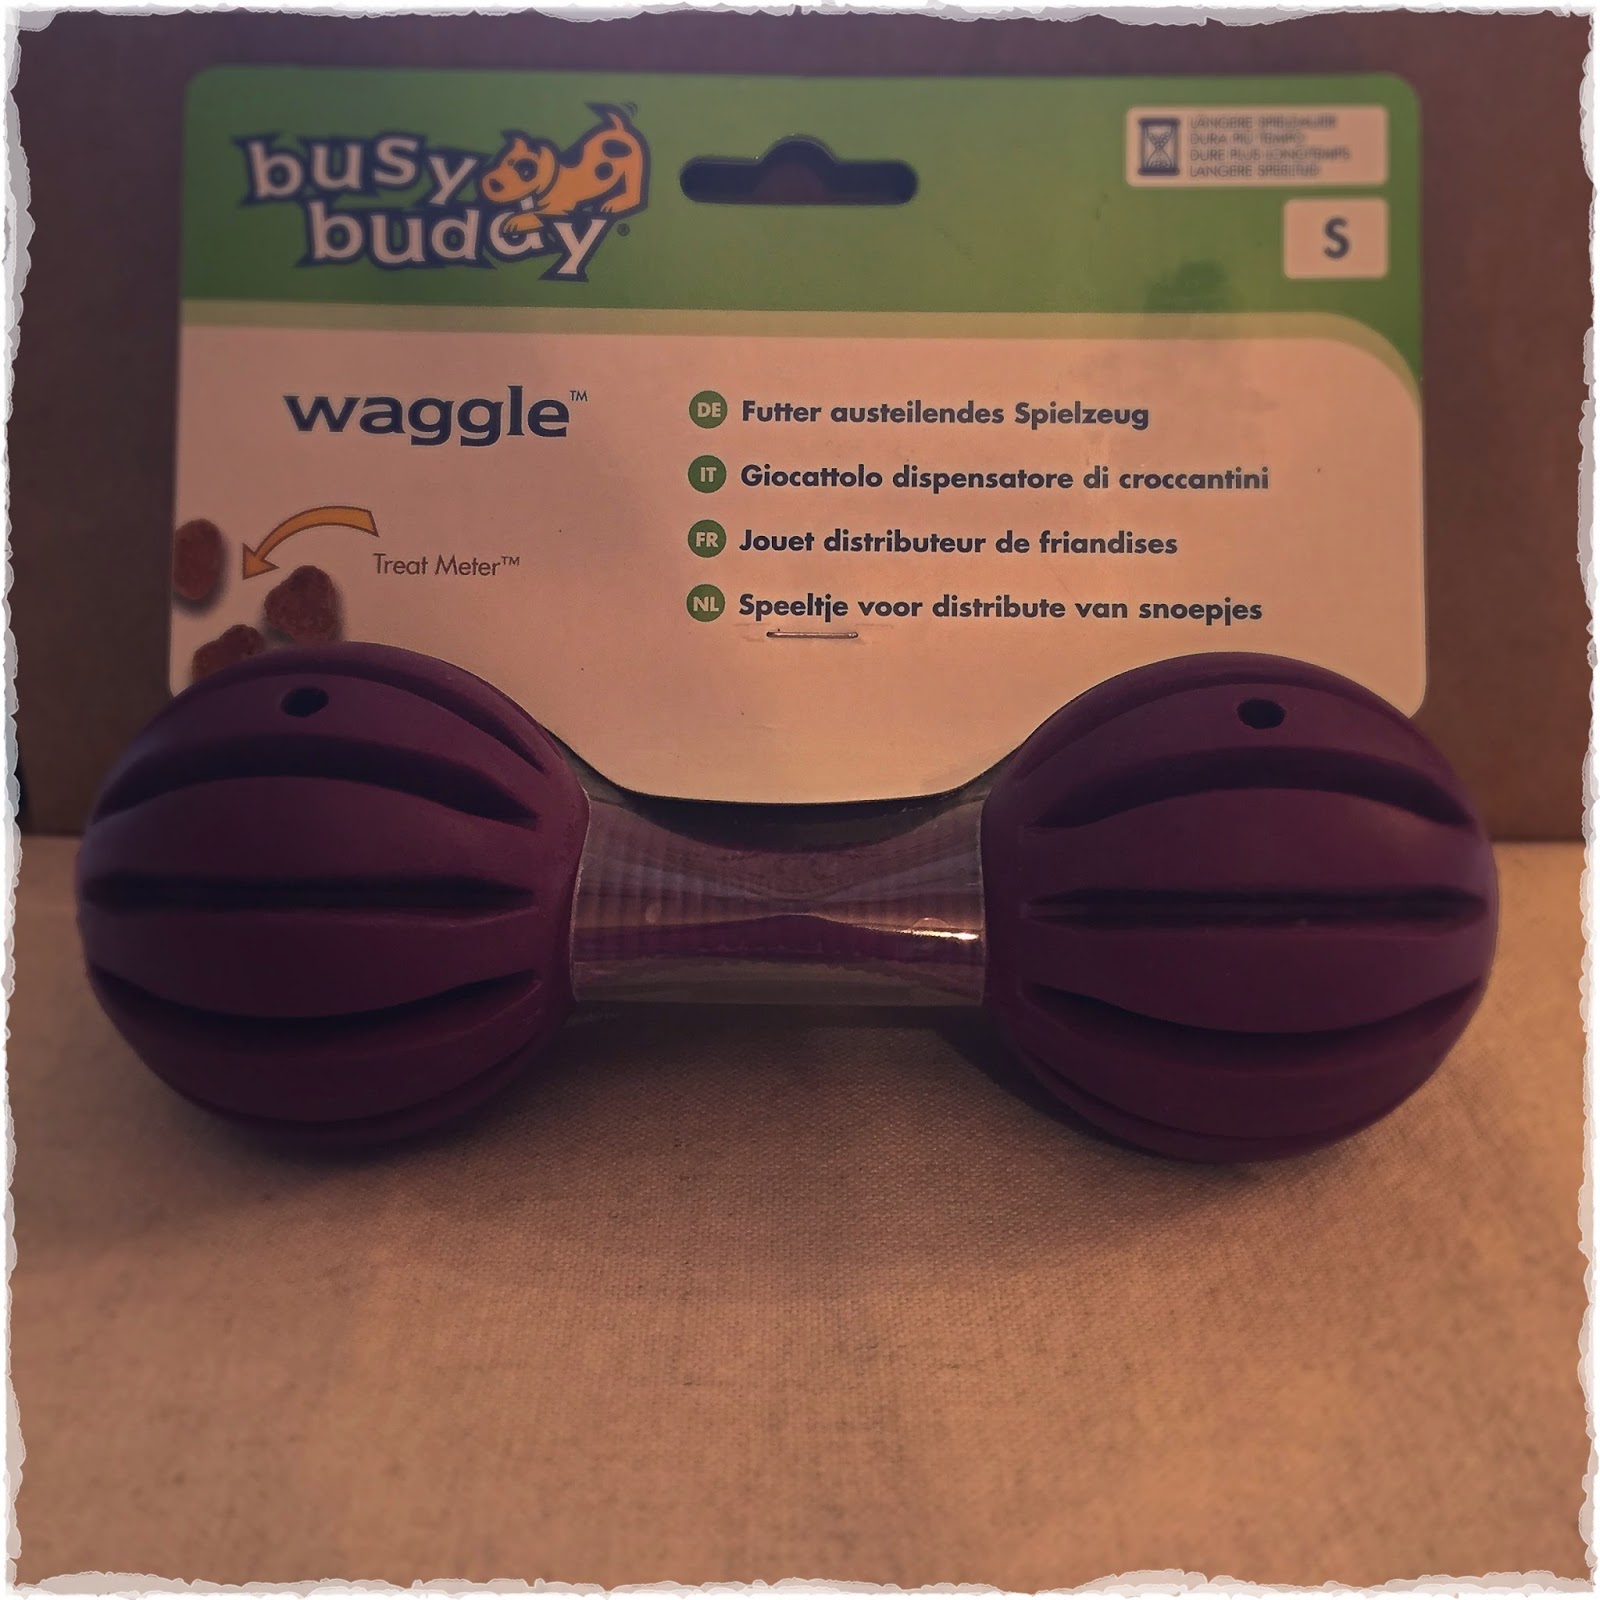 Photo of Busy Buddy Waggle toy